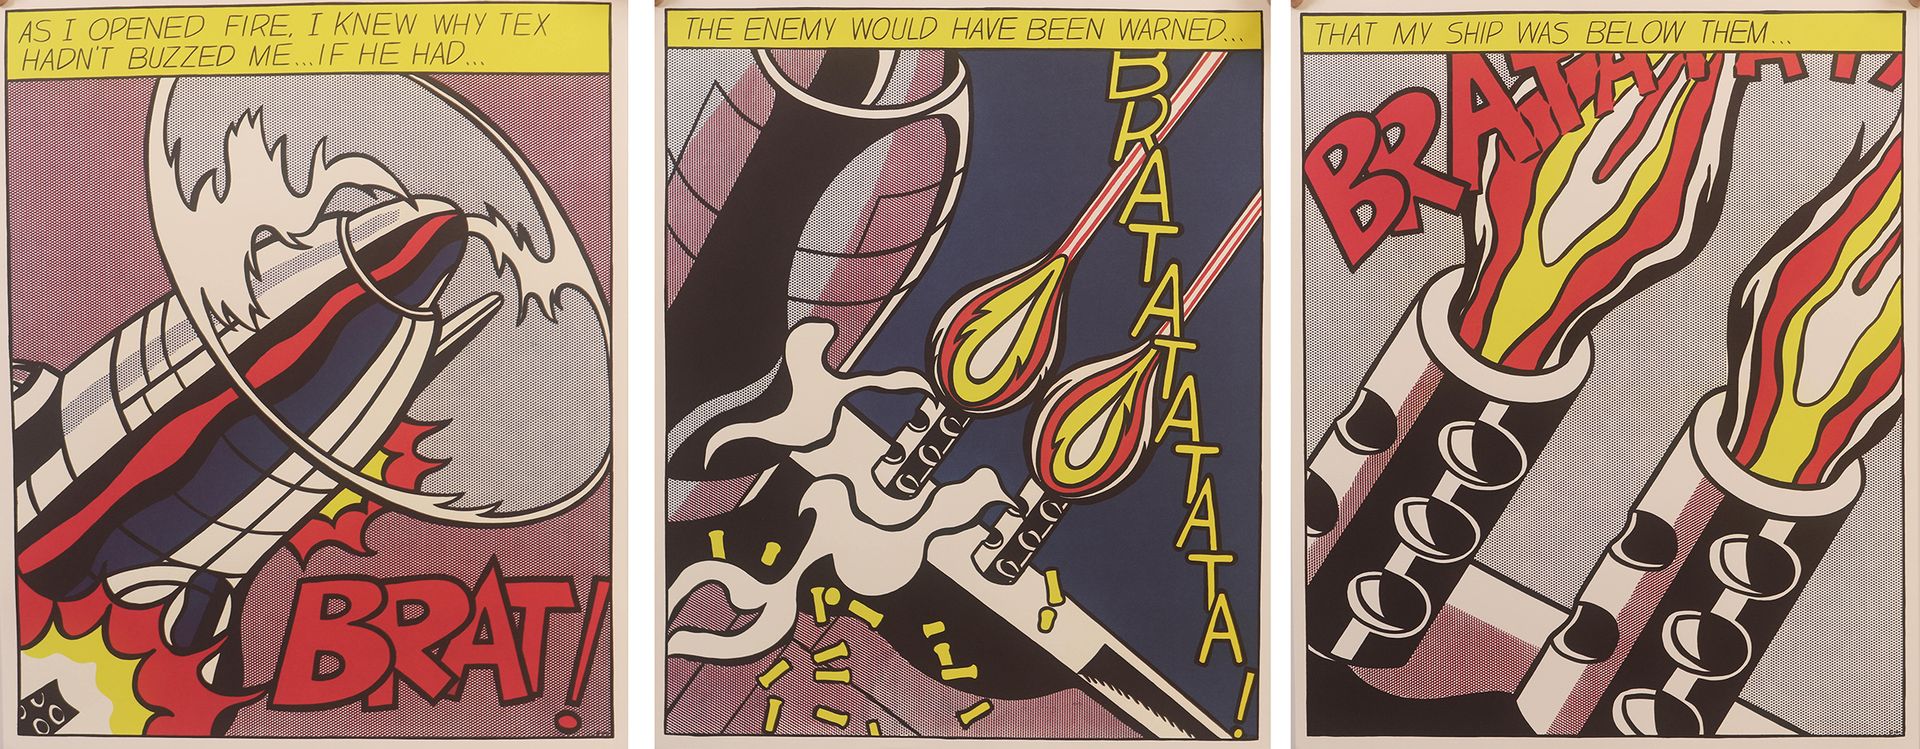 Null "As I opened fire" by Roy Lichtenstein (1923-1997)

Tryptic of serigraphs 
&hellip;